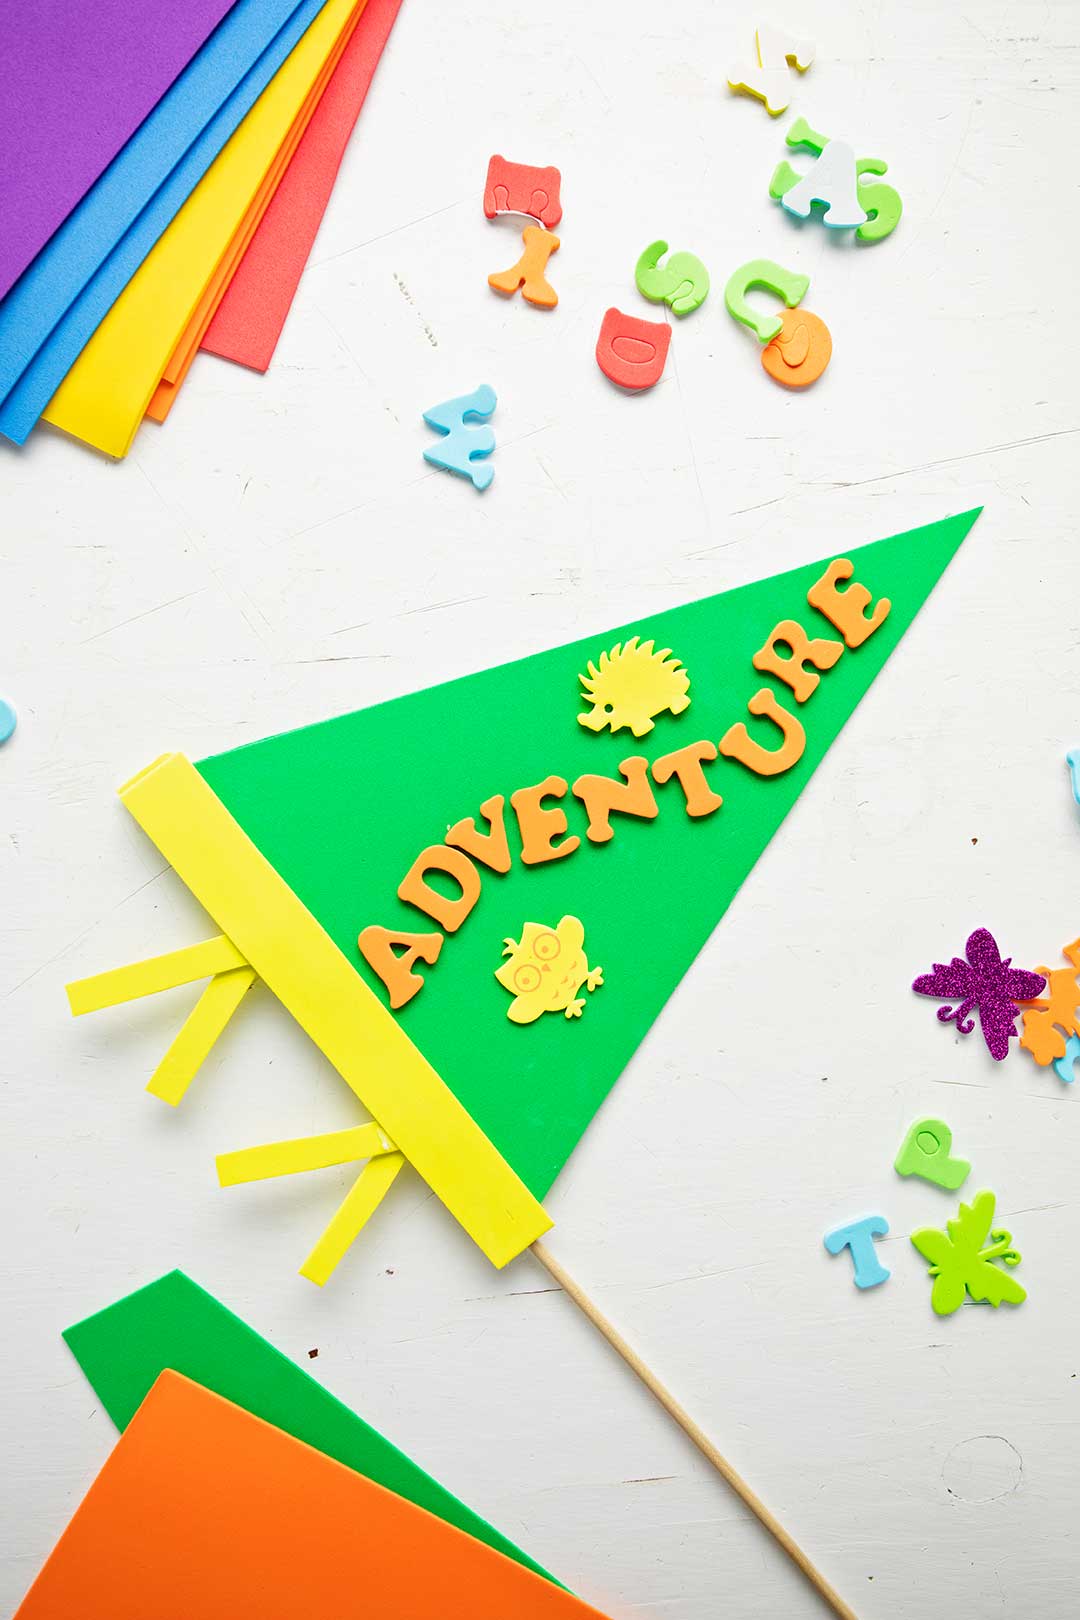 Green pennant decorated with "adventure" and various foam supplies resting on a white background.